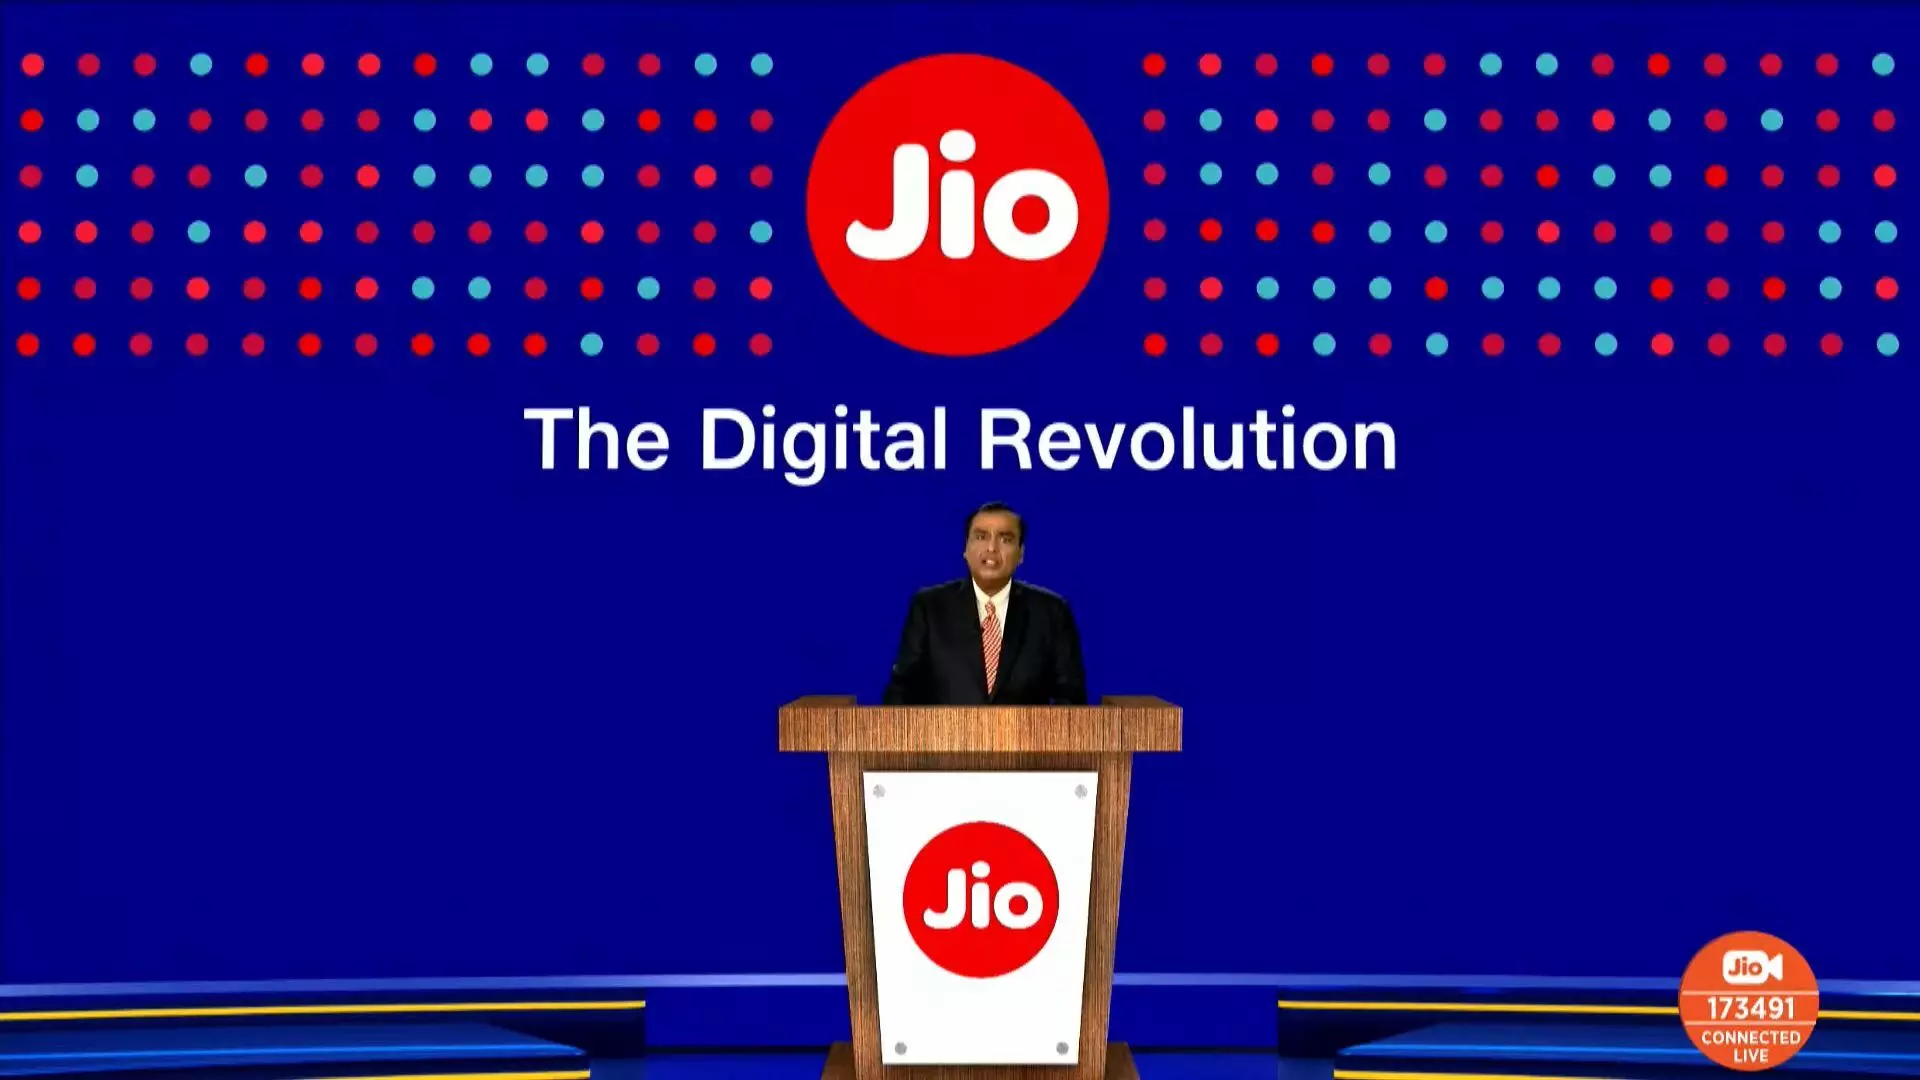 Jio pushed internet users 2.5 times in Gujarat in 5 years